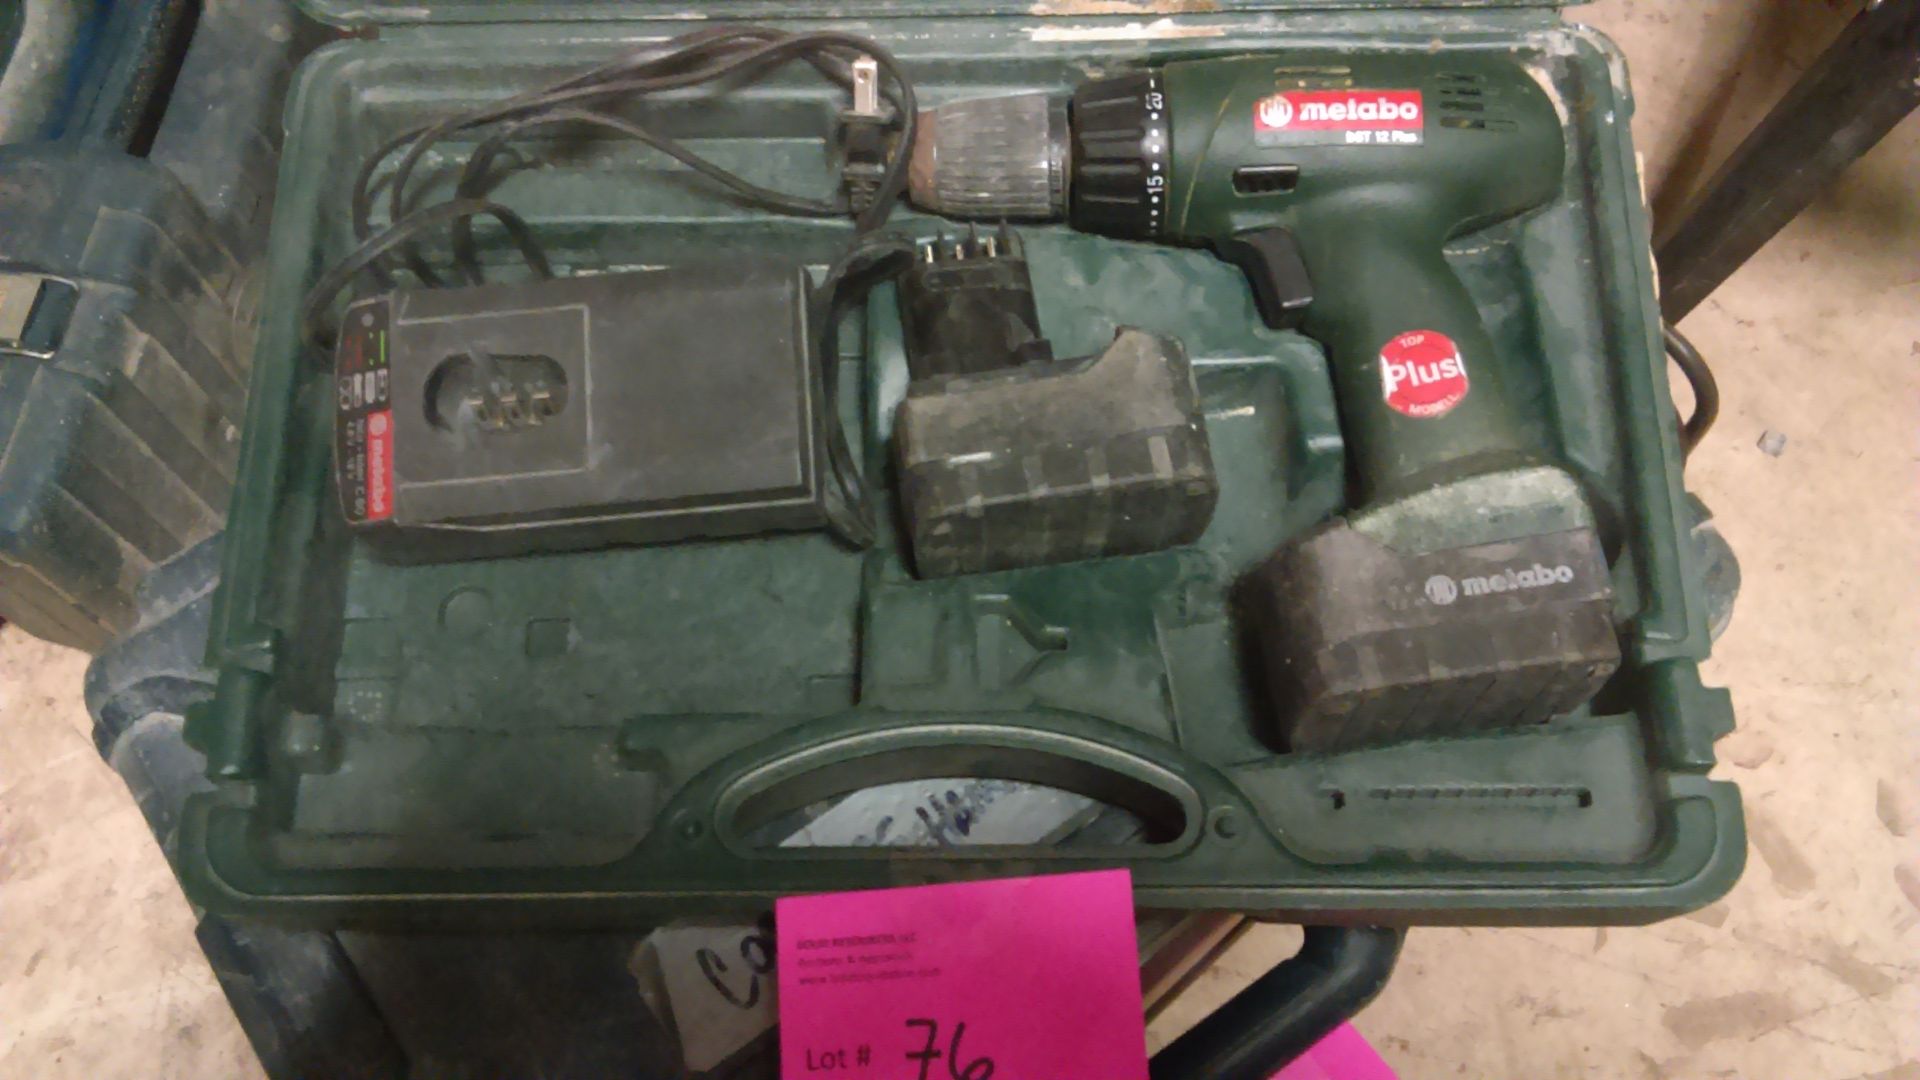 METABO CORDLESS DRILL, CHARGER, (2) BATTERIES, IN CASE